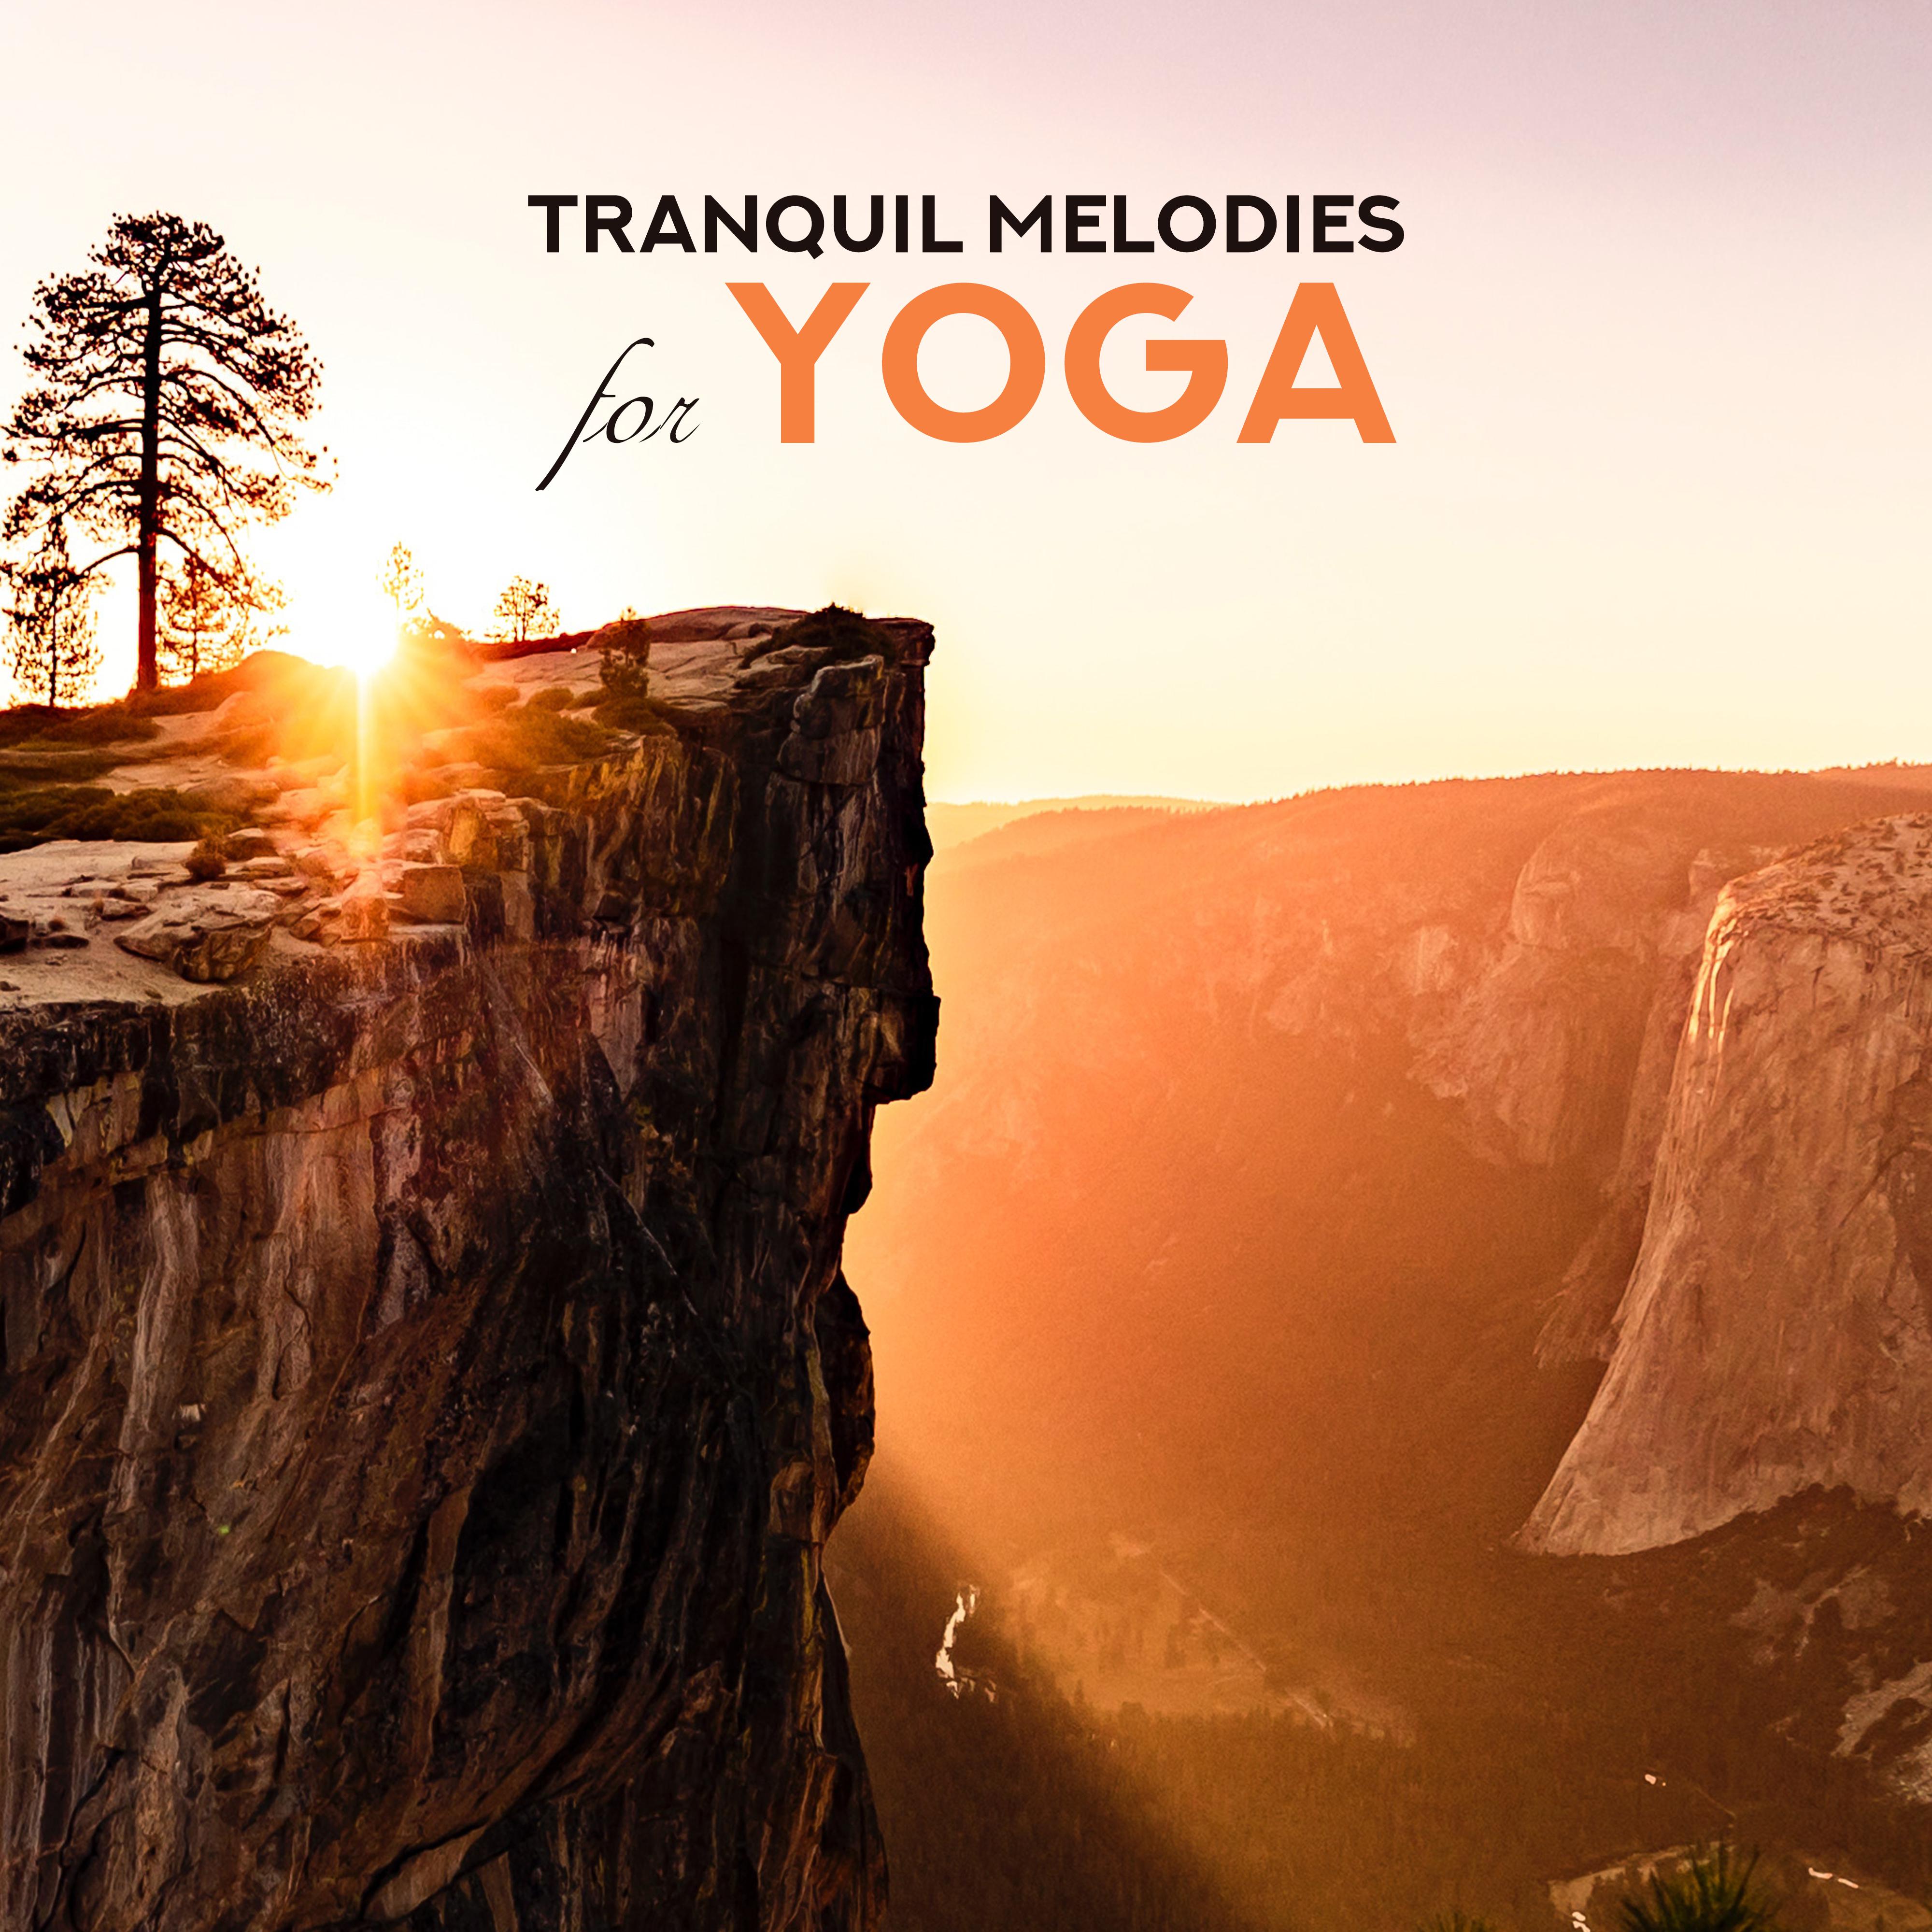 Tranquil Melodies for Yoga – Relaxing Music for Meditation, Spiritual Awakening, Sleep, Calm Down, Pure Mind, Deep Relaxation, Classical Meditation Music, Zen